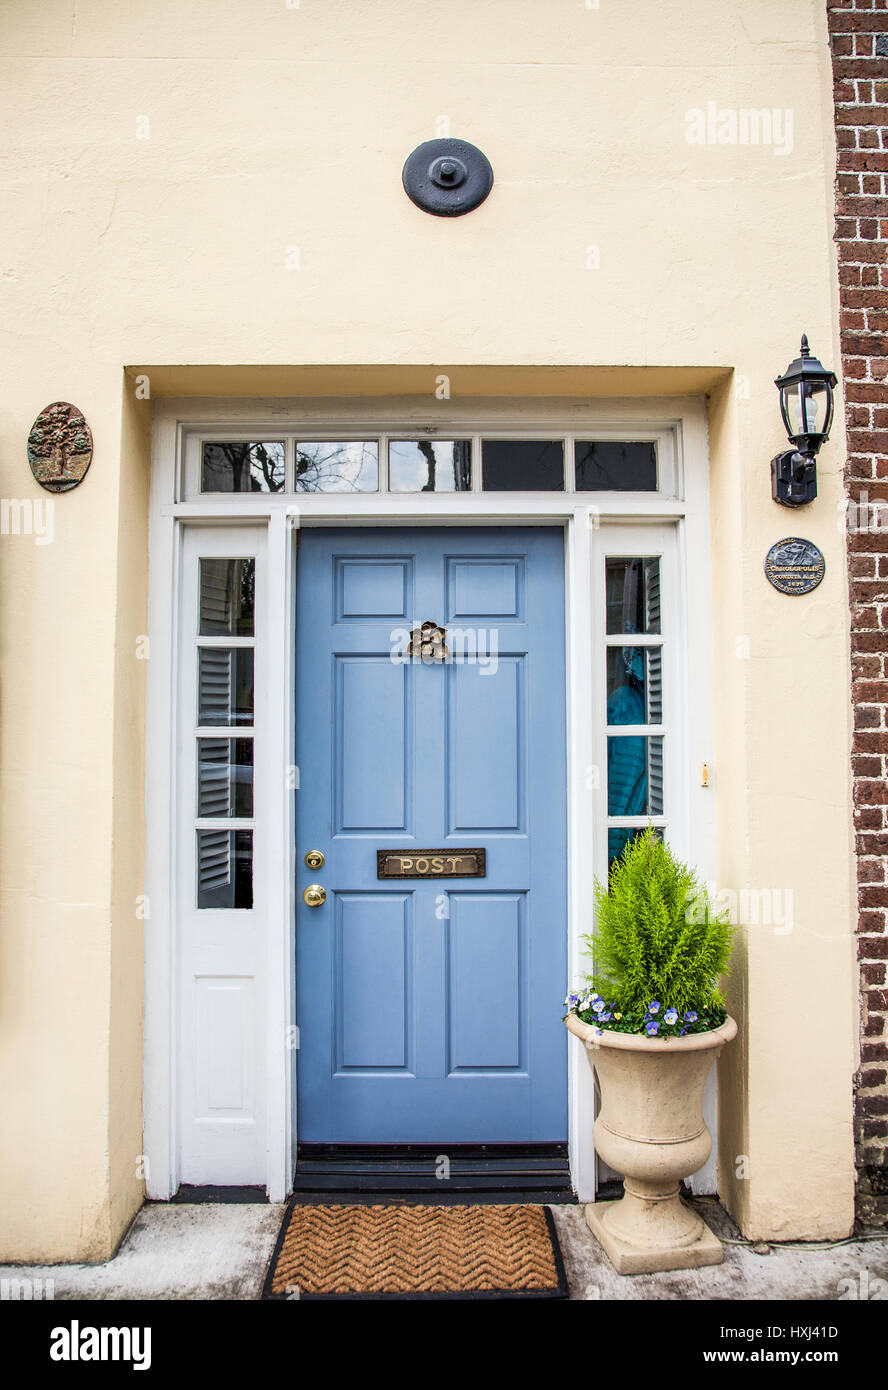 Vintage light blue colour house front door door with a door knocker and letter slot, Charleston, South Carolina, USA, US historic district shrubs PT Stock Photo